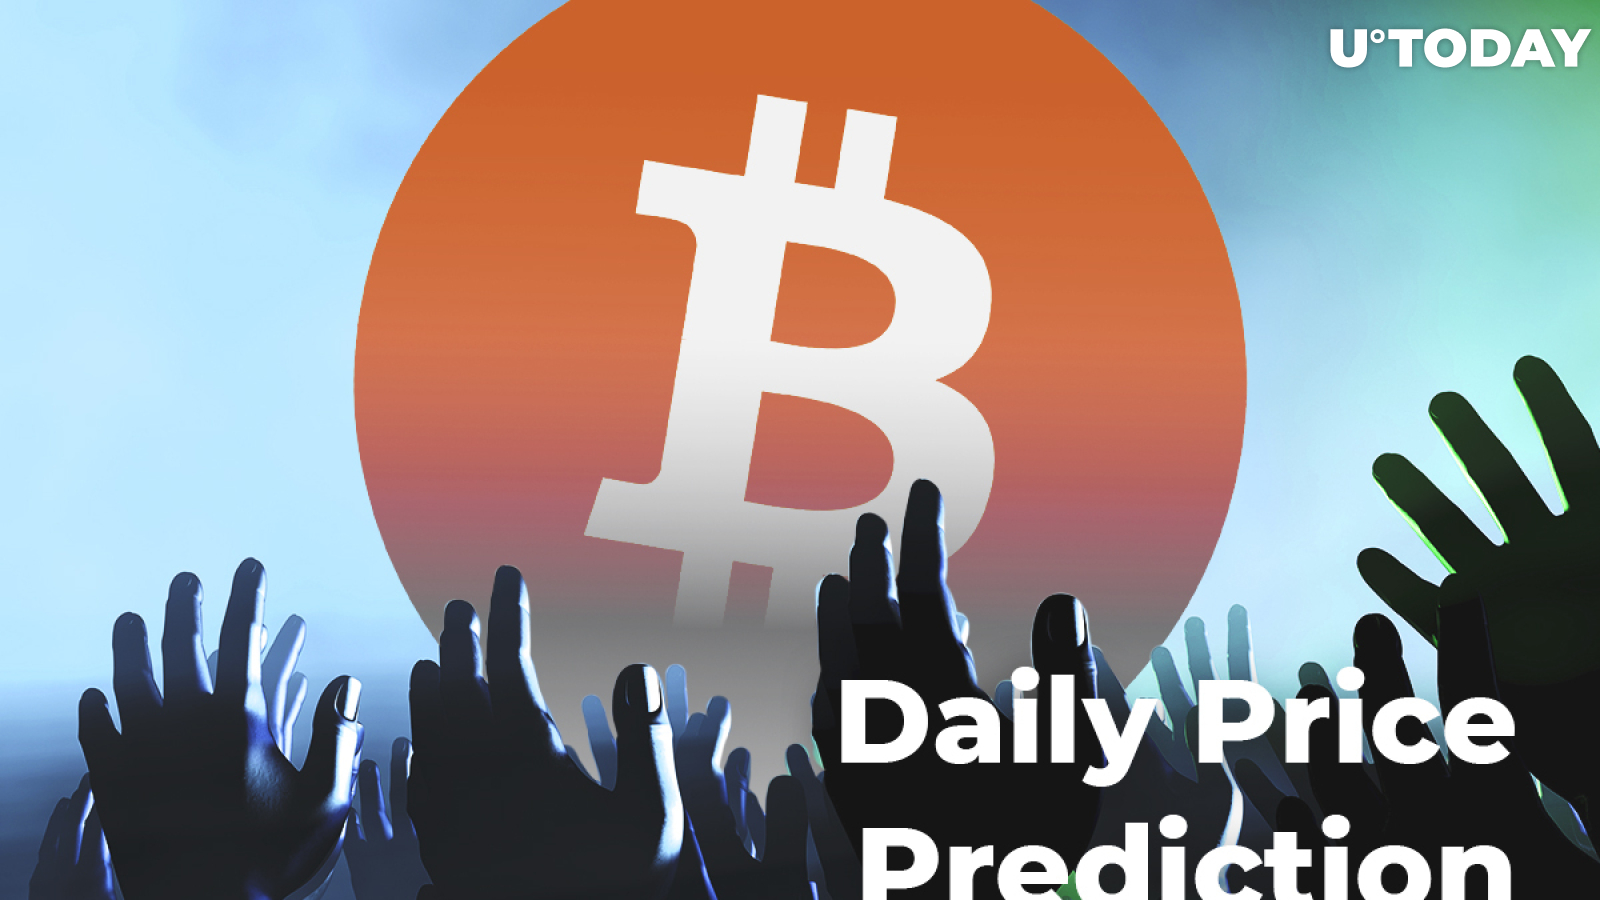 Daily Price Prediction: Bitcoin Is Fighting for Each Resistance Level, Altcoins Are Following Their Own Patterns